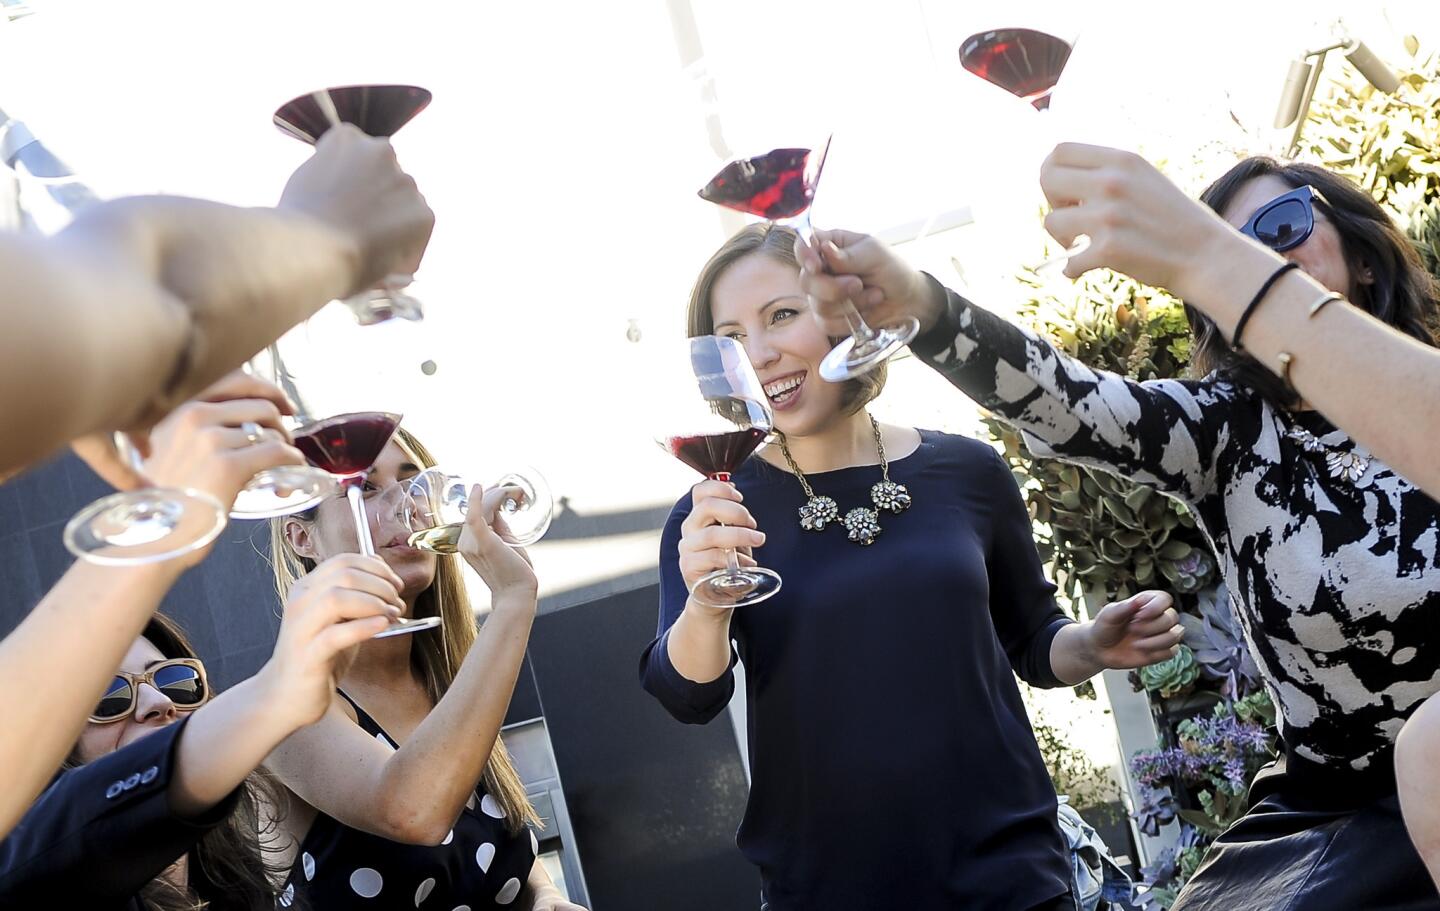 Elizabeth Huettinger, wine director at Otium restaurant, center, hosts a gathering of sommeliers and friends at her apartment building, the newly completed Emerson in downtown L.A.